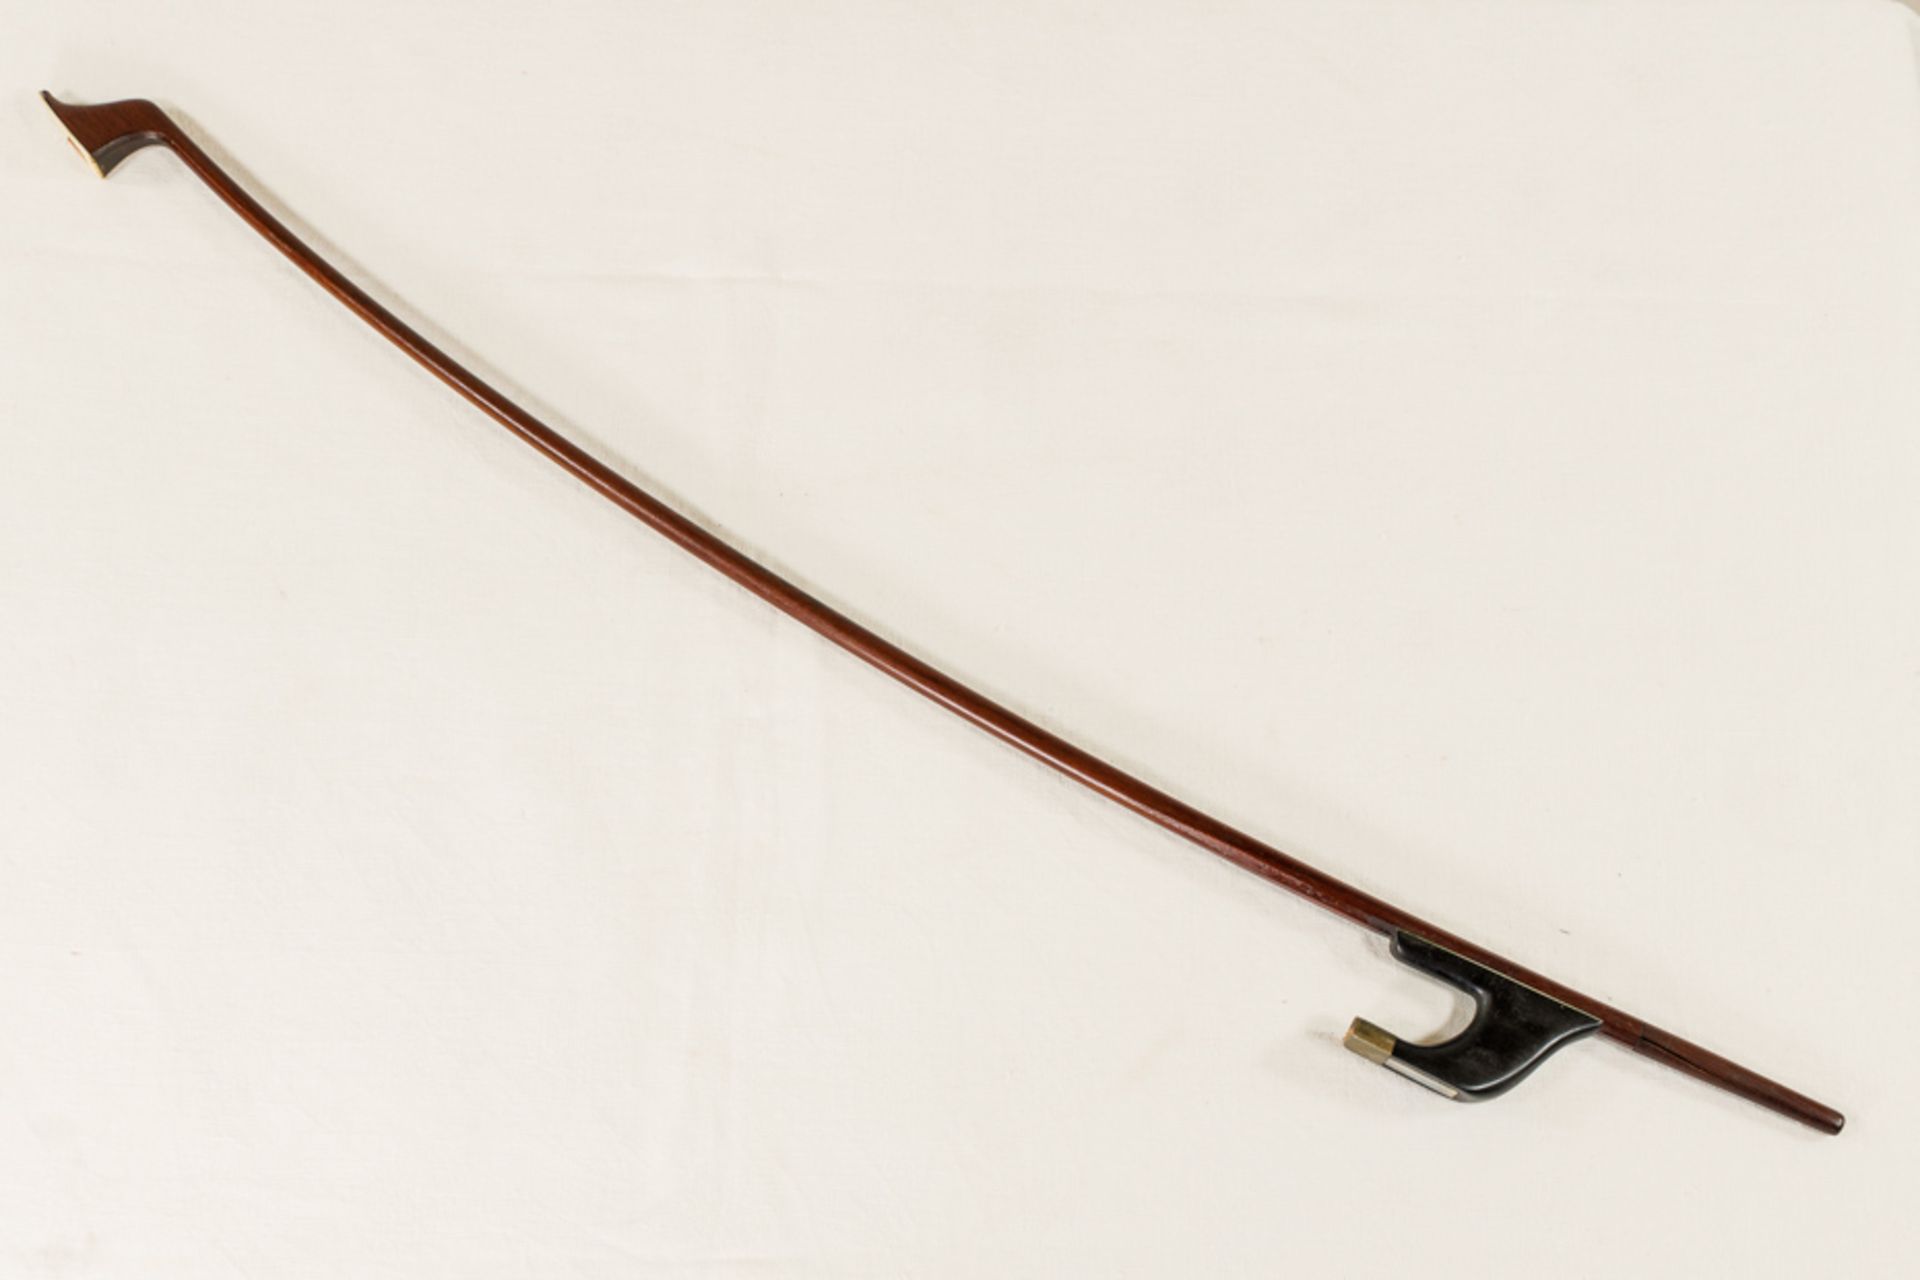 DOUBLE BASS BOW “EXPION” BY EMILE AUGUSTE OUCHARD ET FILS